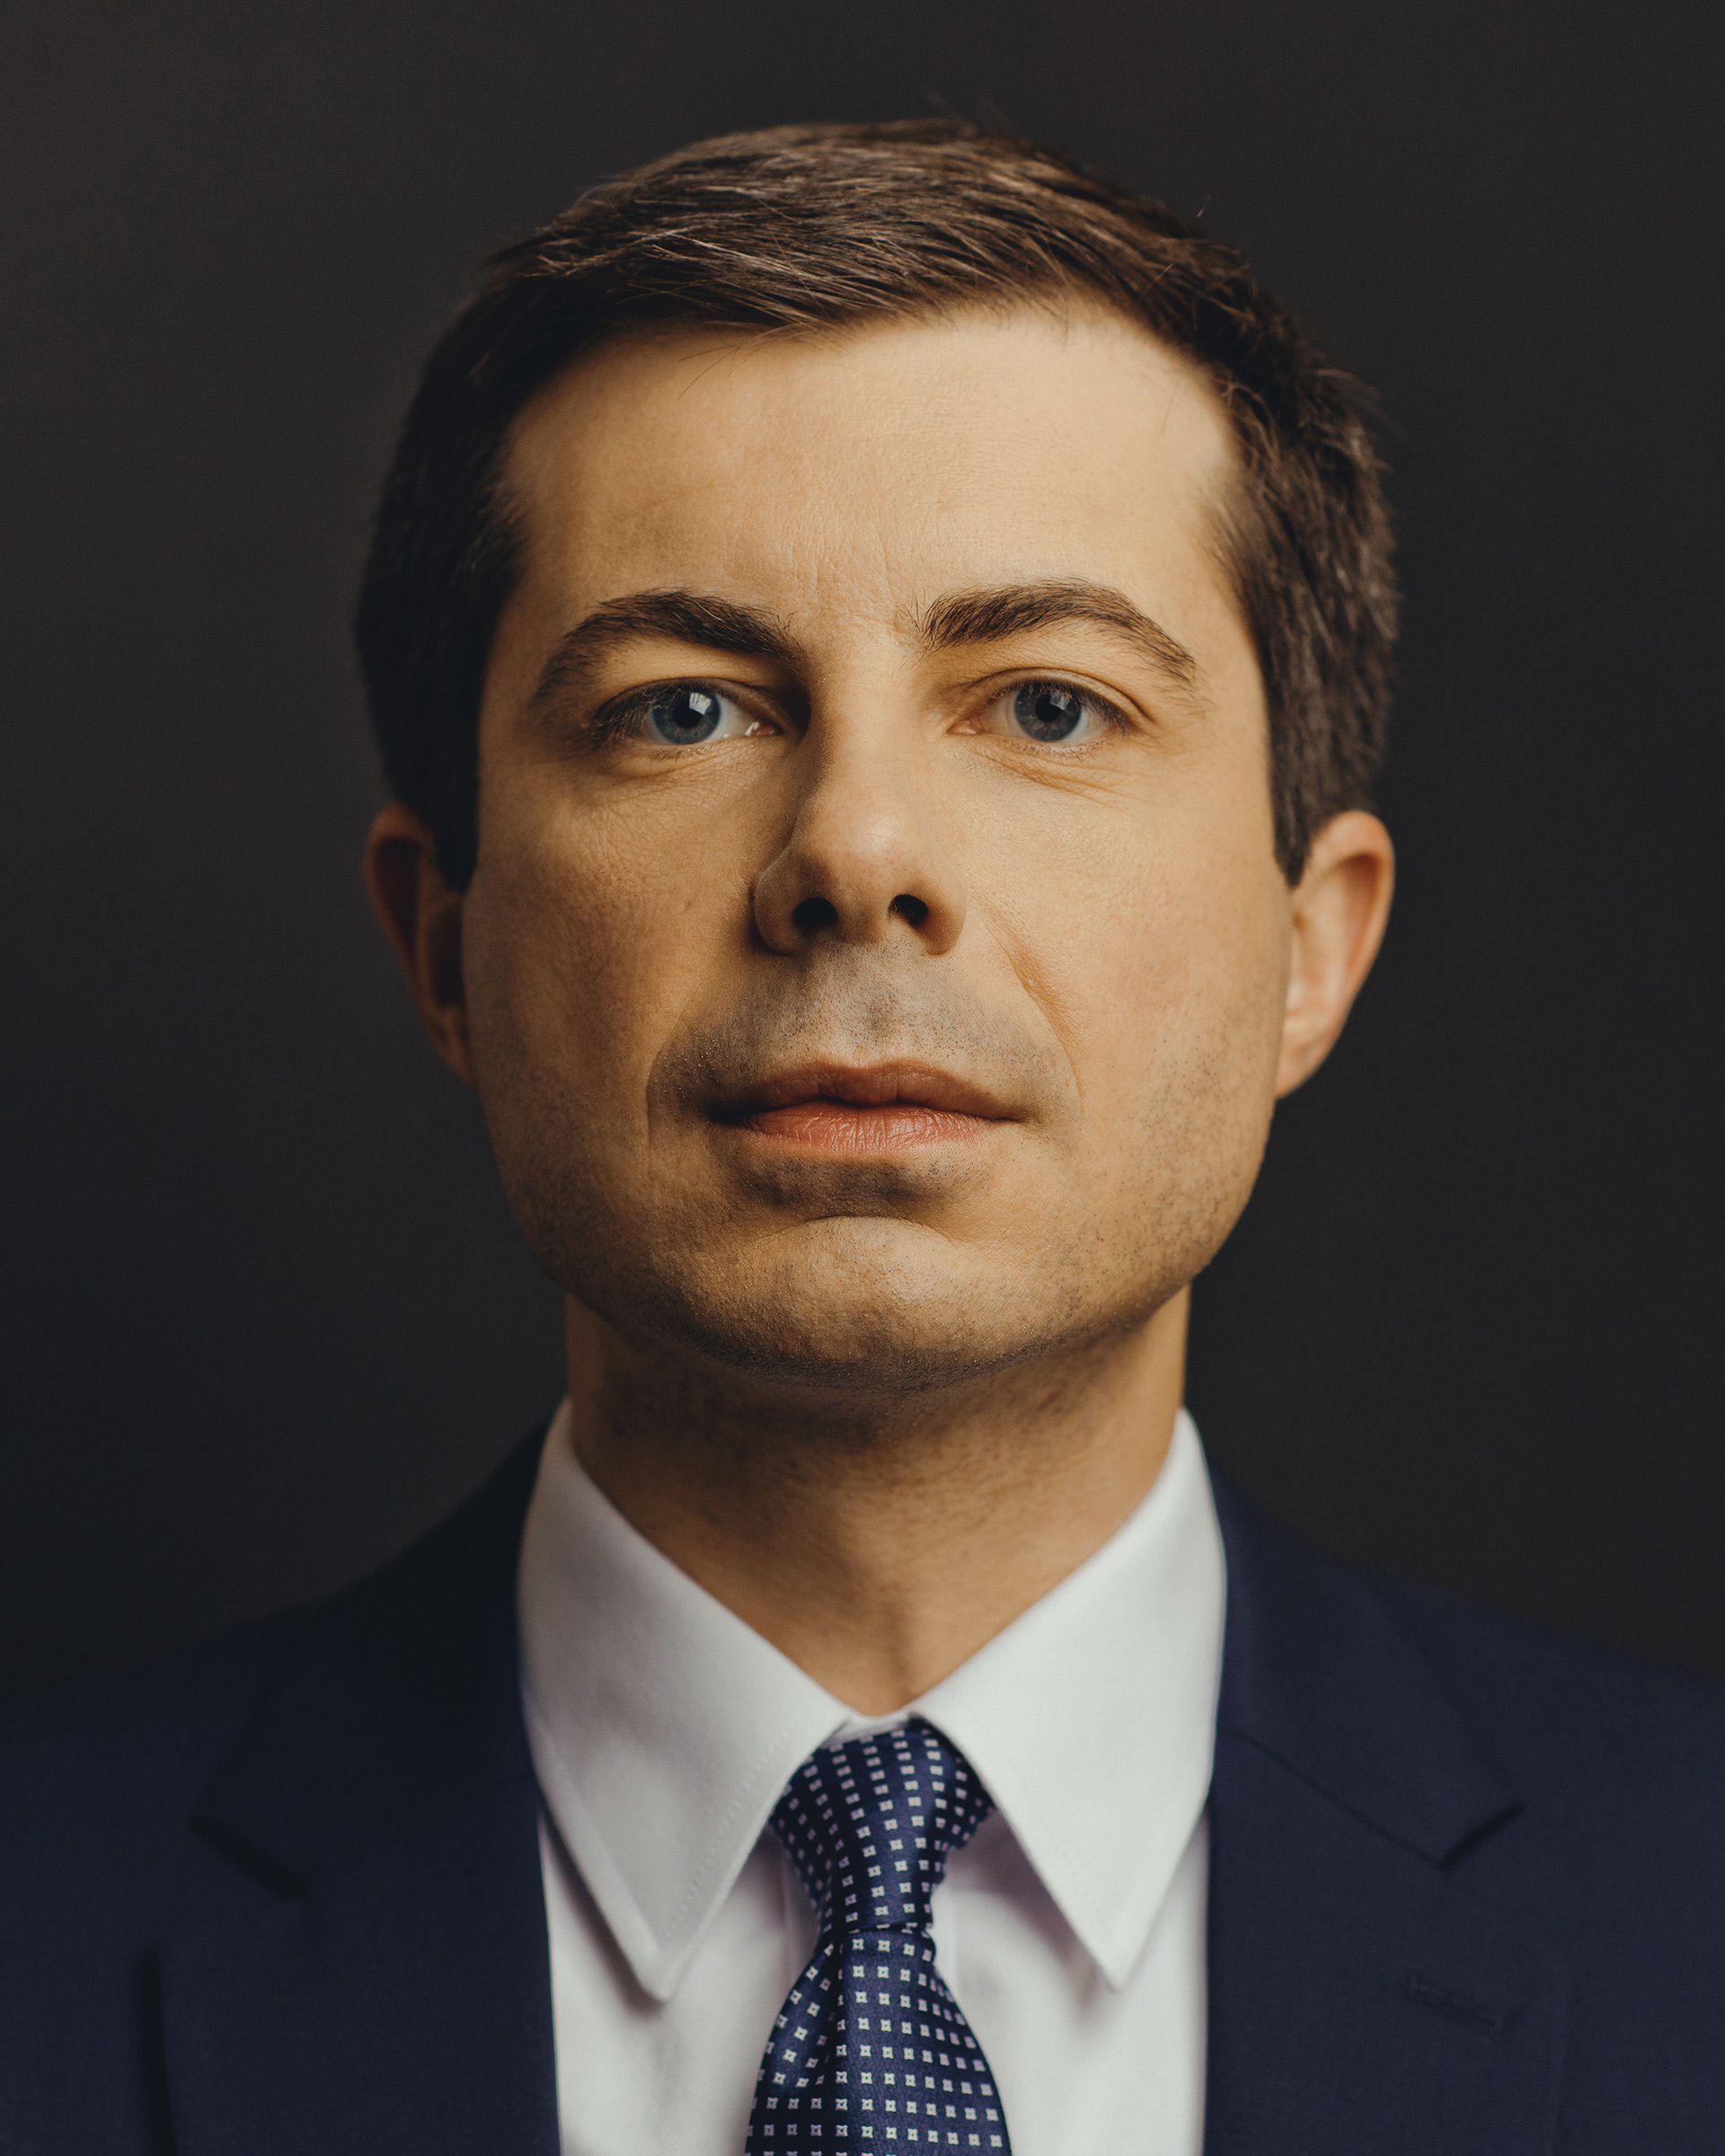 Pete Buttigieg. "First Family," May 13 issue. (Ryan Pfluger for TIME)